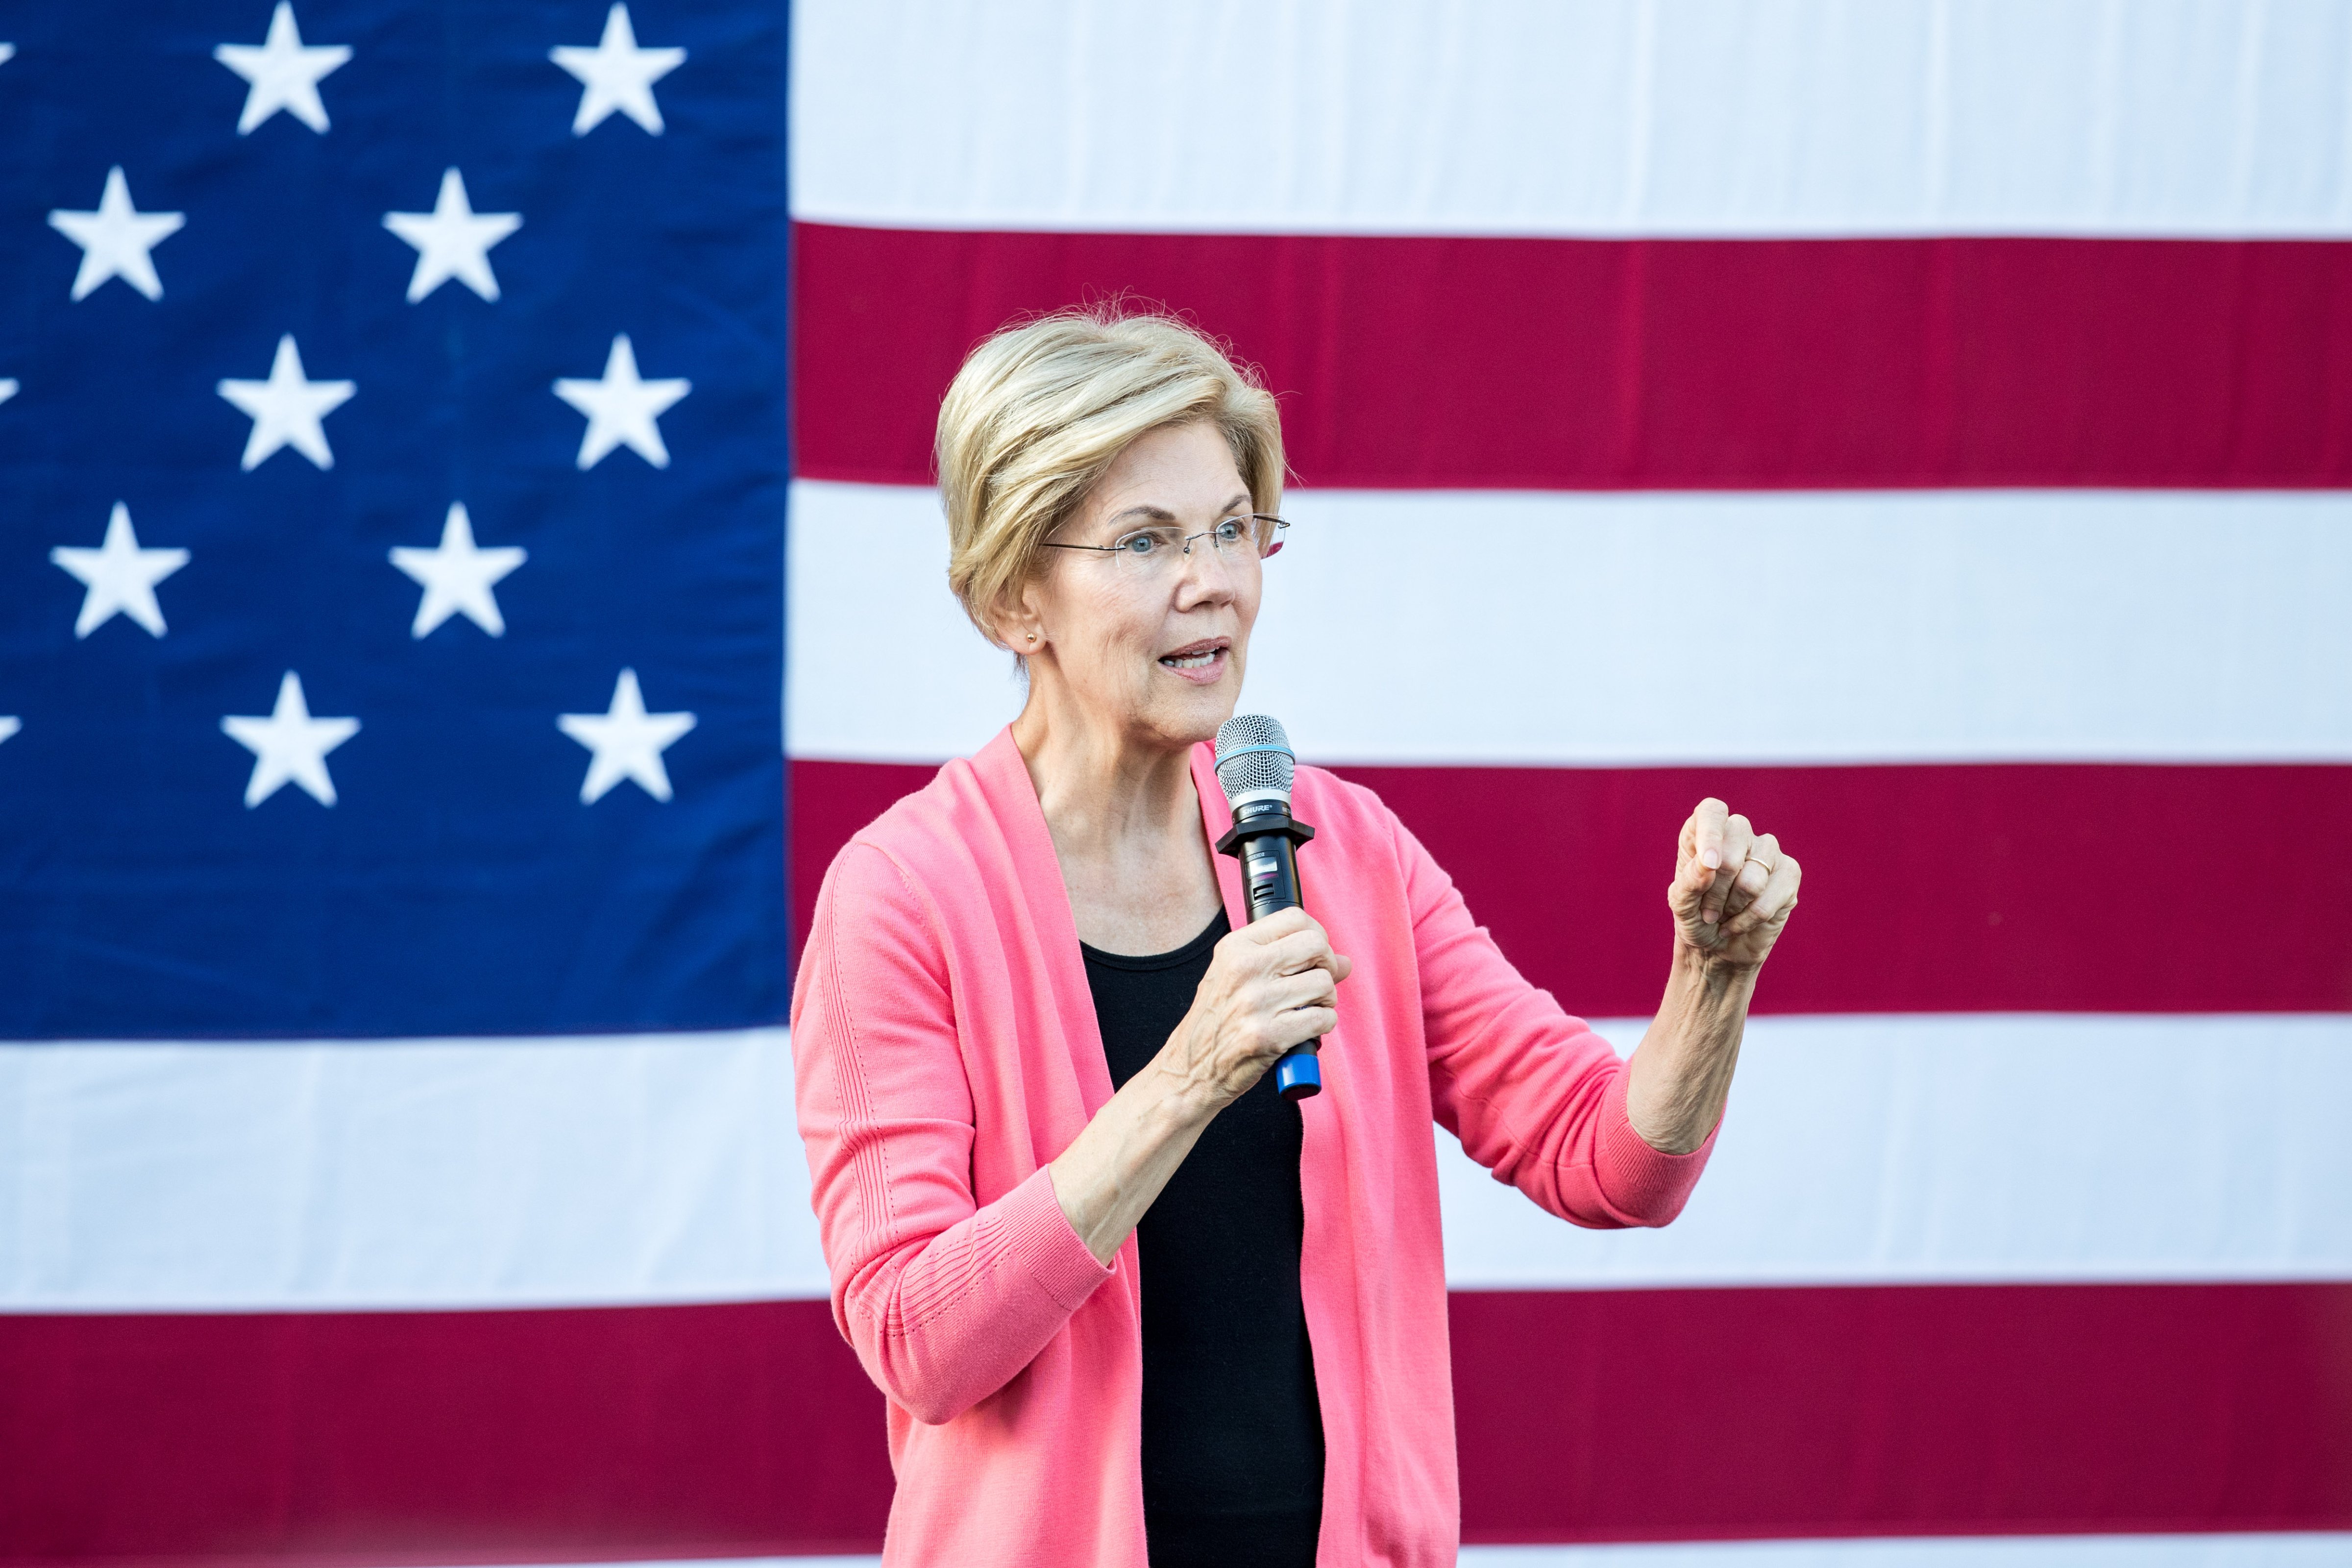 Democratic presidential candidate Sen. Elizabeth Warren (D-MA) speaks during a Town Hall at Keene State College on Sept. 25, 2019 in Keene, New Hampshire. (Scott Eisen/Getty Images)